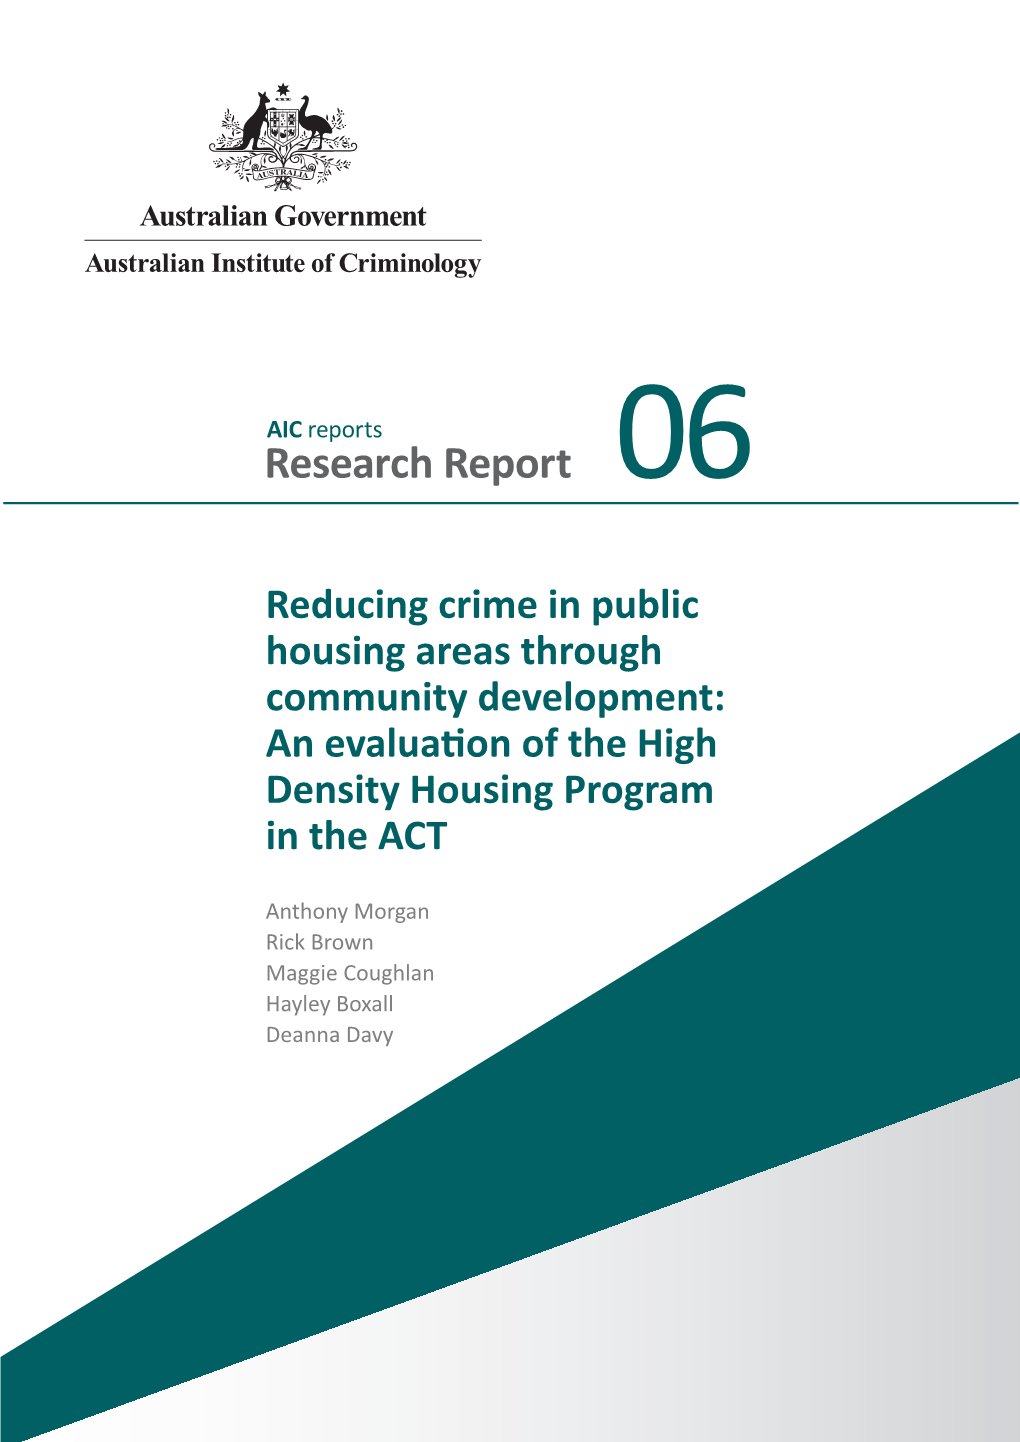 Reducing Crime in Public Housing Areas Through Community Development: an Evaluation of the High Density Housing Program in the ACT